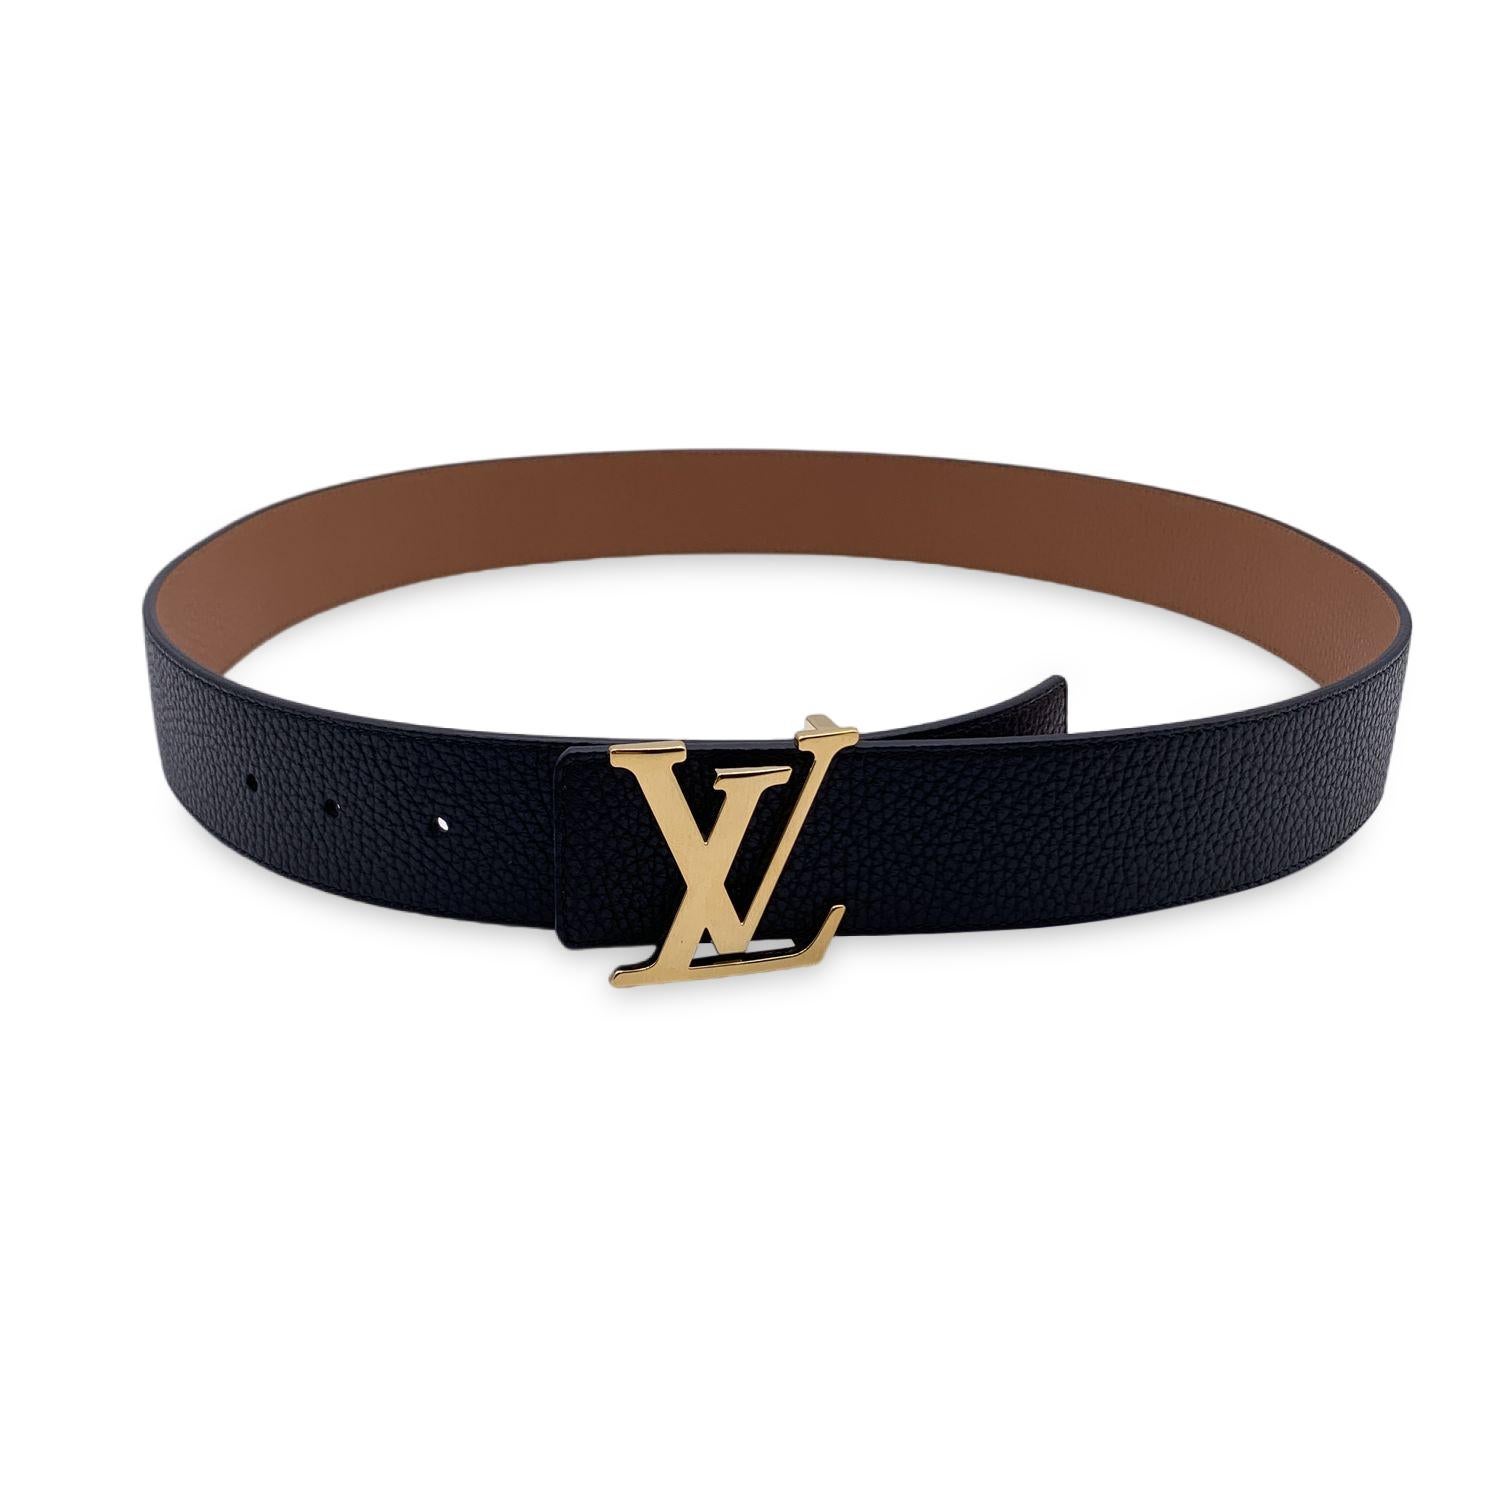 This beautiful belt will come with a Certificate of Authenticity provided by Entrupy. The certificate will be provided at no further cost.

LOUIS VUITTON reversible 'LV Initiales' belt. Made of fine black and beige Taurillon leather. The belt